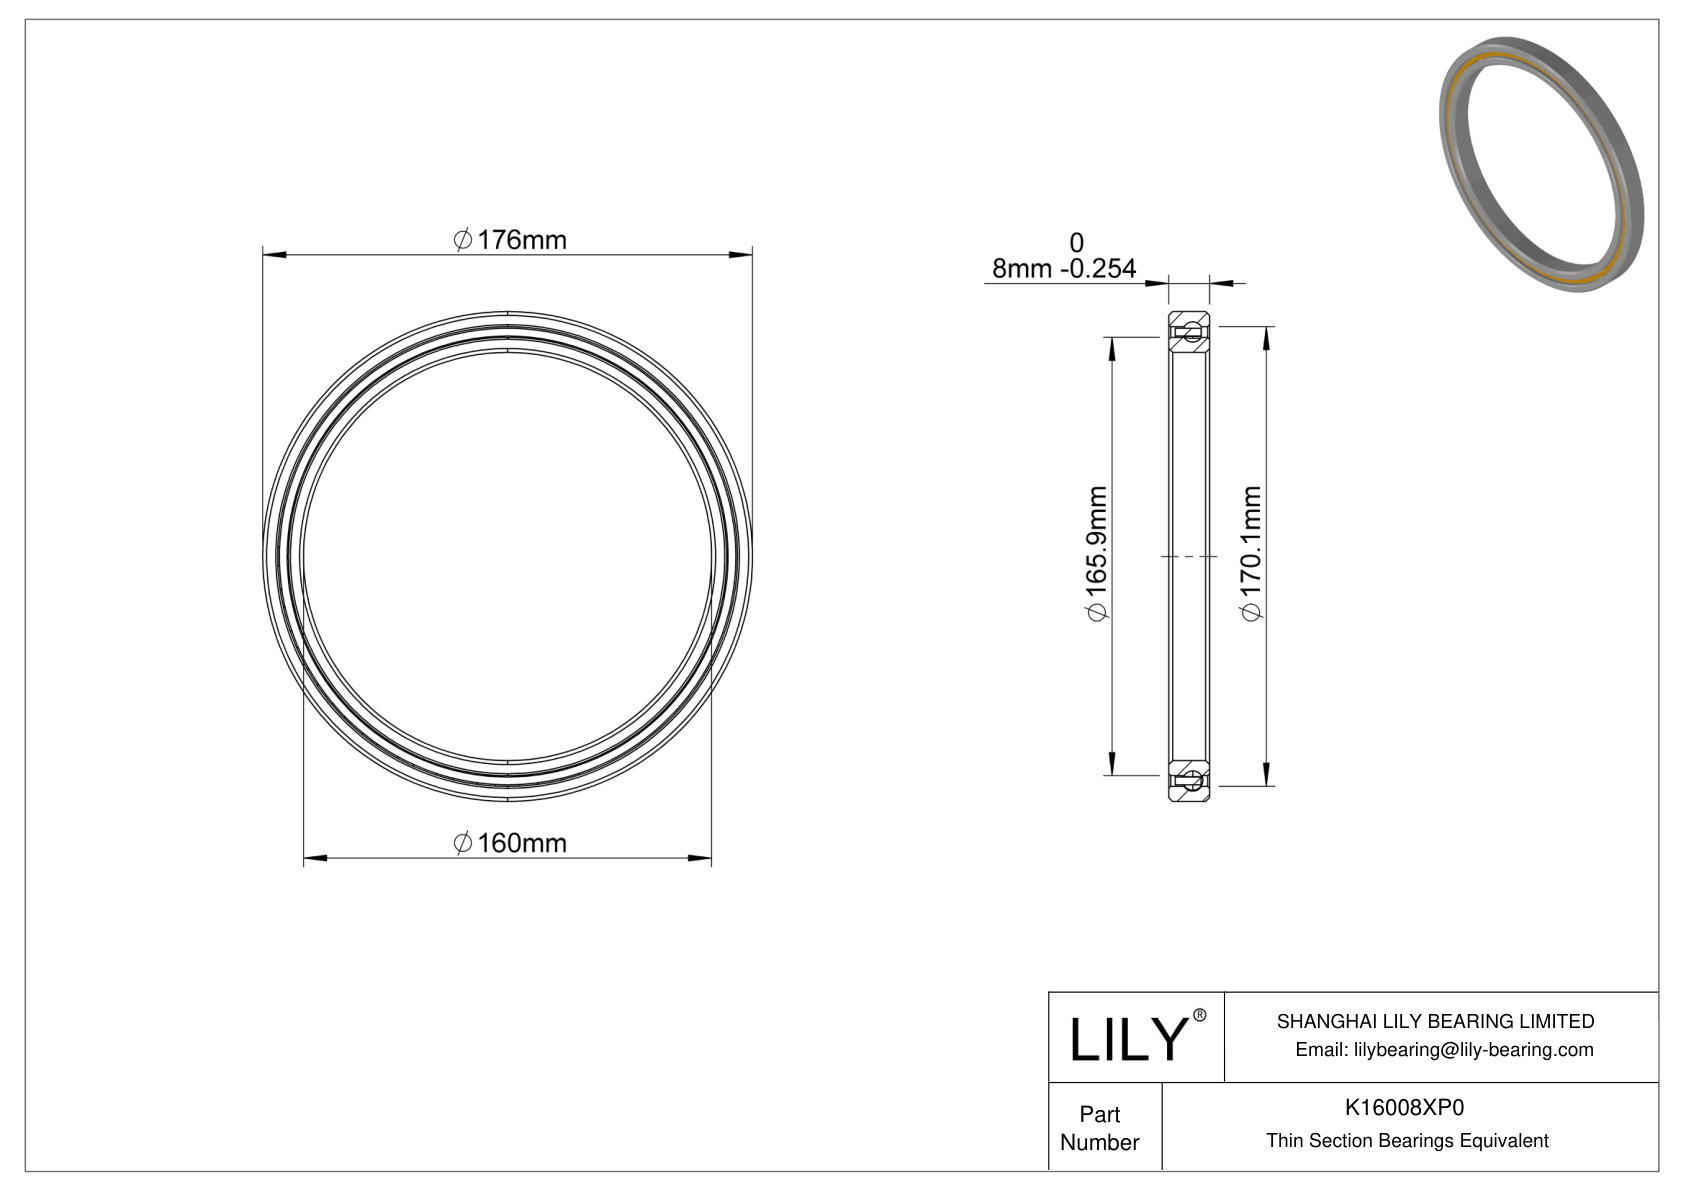 K16008XP0 Constant Section (CS) Bearings cad drawing